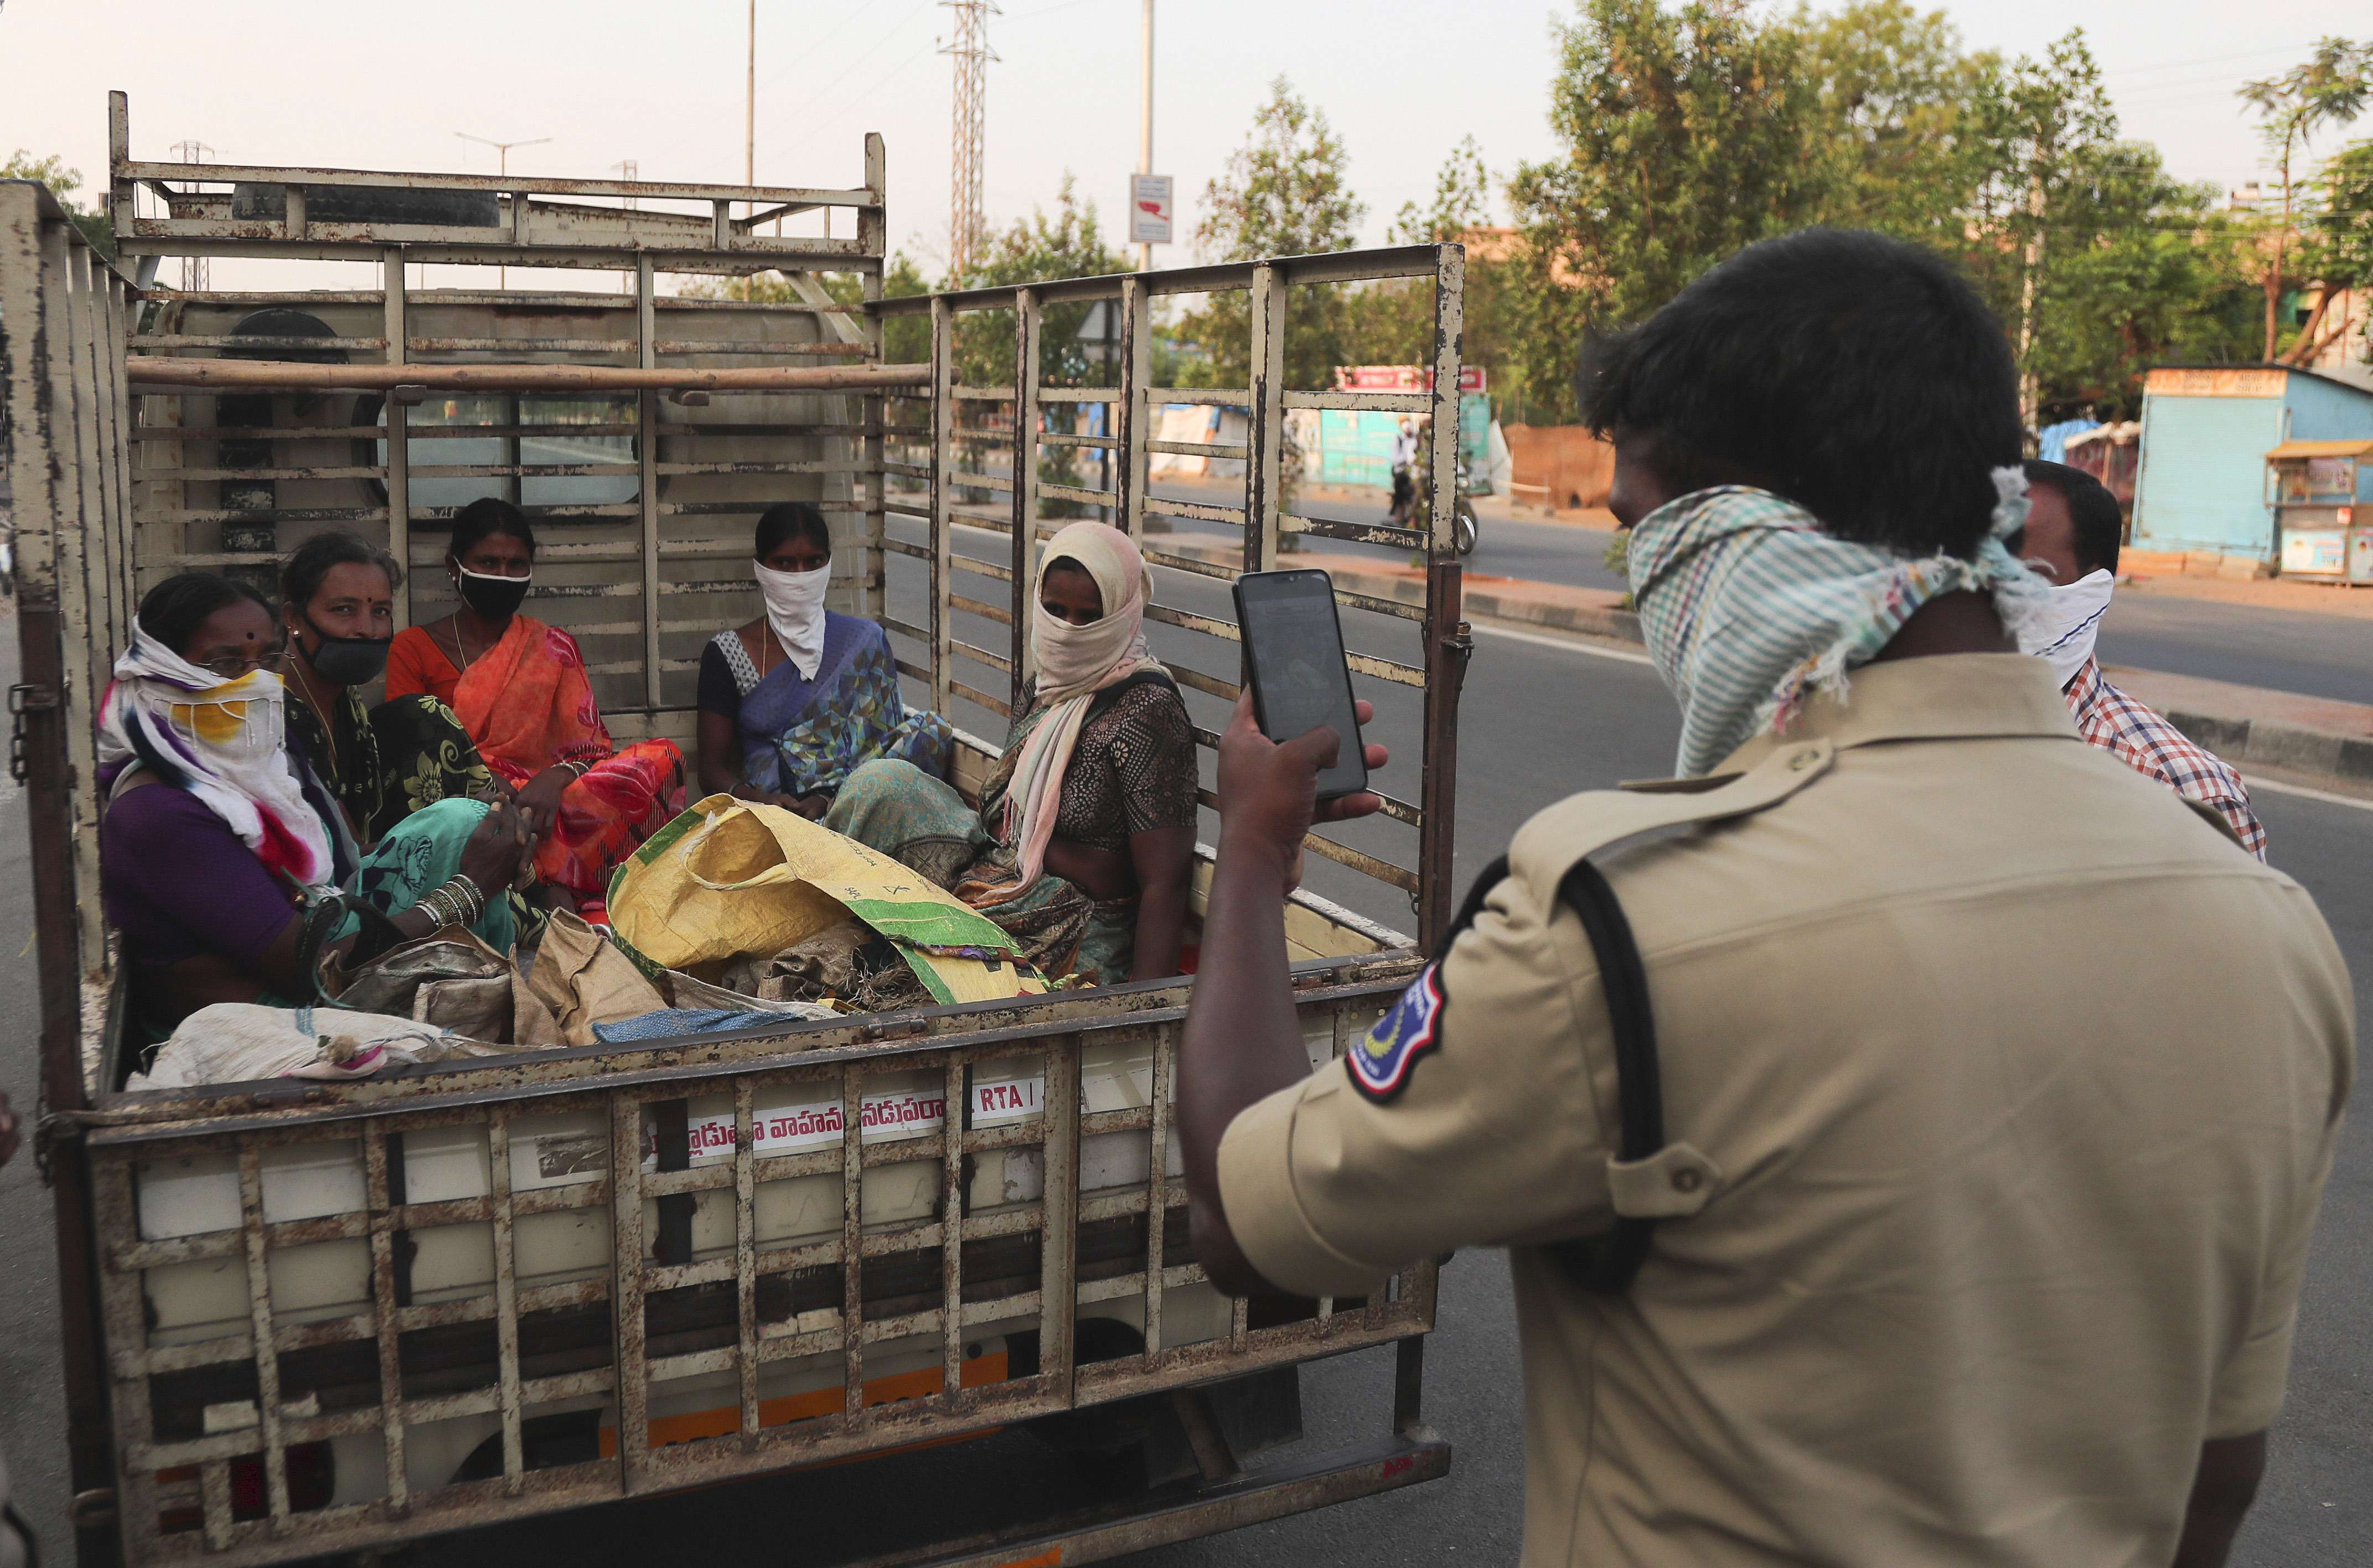 An Indian policeman takes photograph of women traveling in a mini lorry violating rules during lockdown to prevent the spread of new coronavirus in Hyderabad, India, Wednesday, April 22, 2020. India has reported nearly 20,000 confirmed cases of COVID-19 and over 600 deaths. (AP Photo/Mahesh Kumar A.)